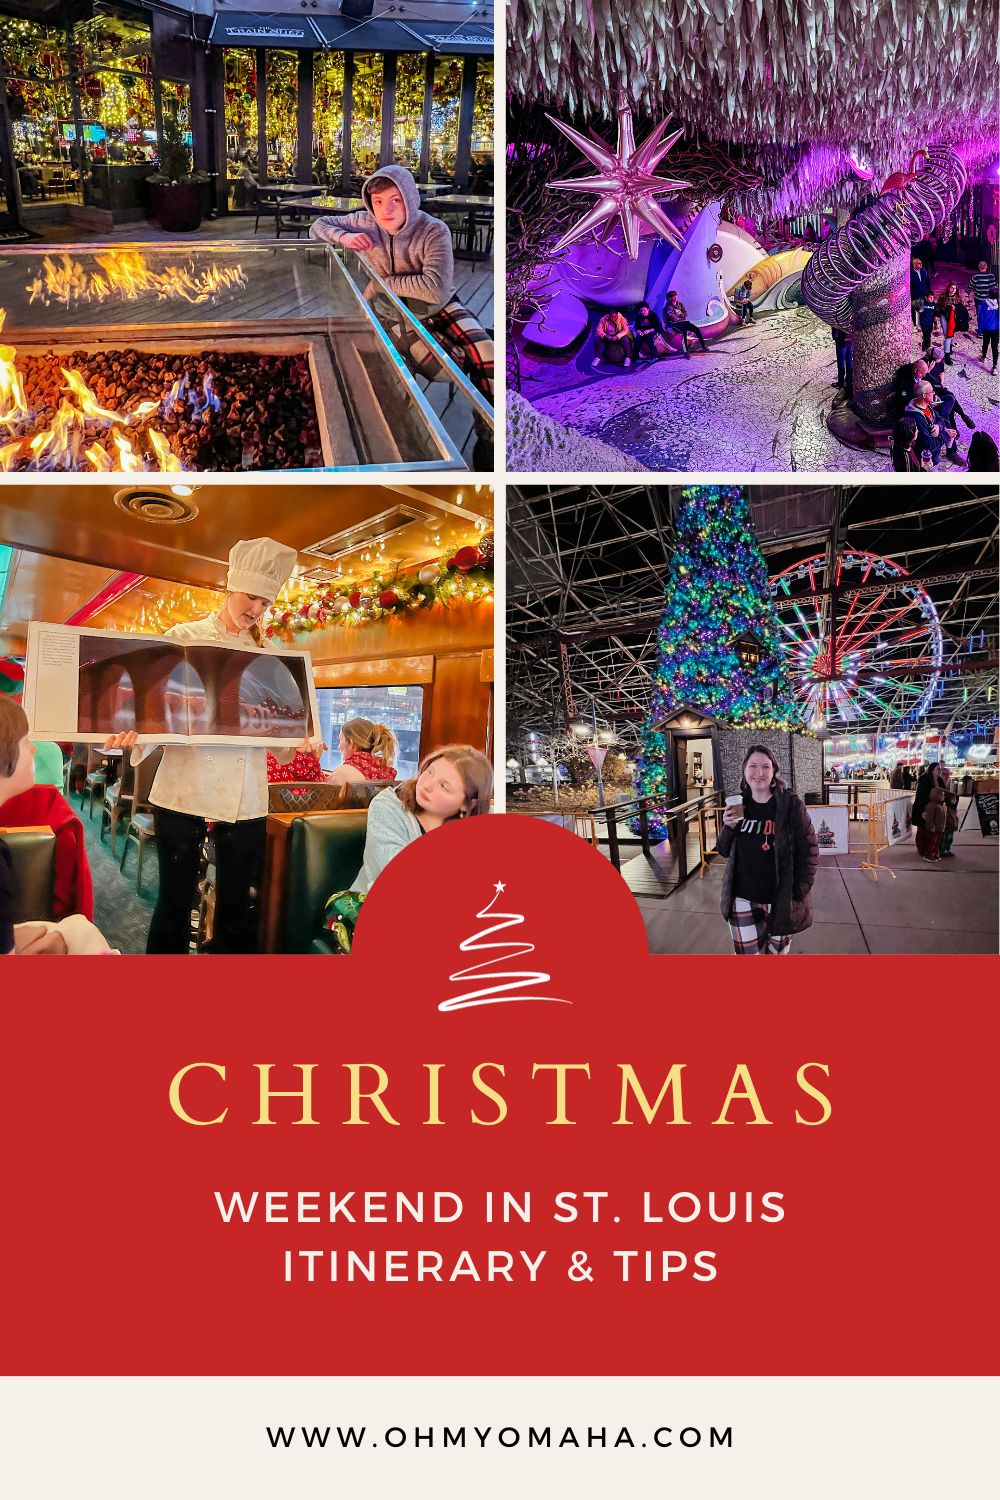 Discover the Holiday Magic of St. Louis!  From dazzling light displays at the Zoo and Botanic Garden to festive fun at The City Museum, uncover the best holiday activities St. Louis has to offer. Pin this for your ultimate guide & itinerary to a festive family adventure in St. Louis!